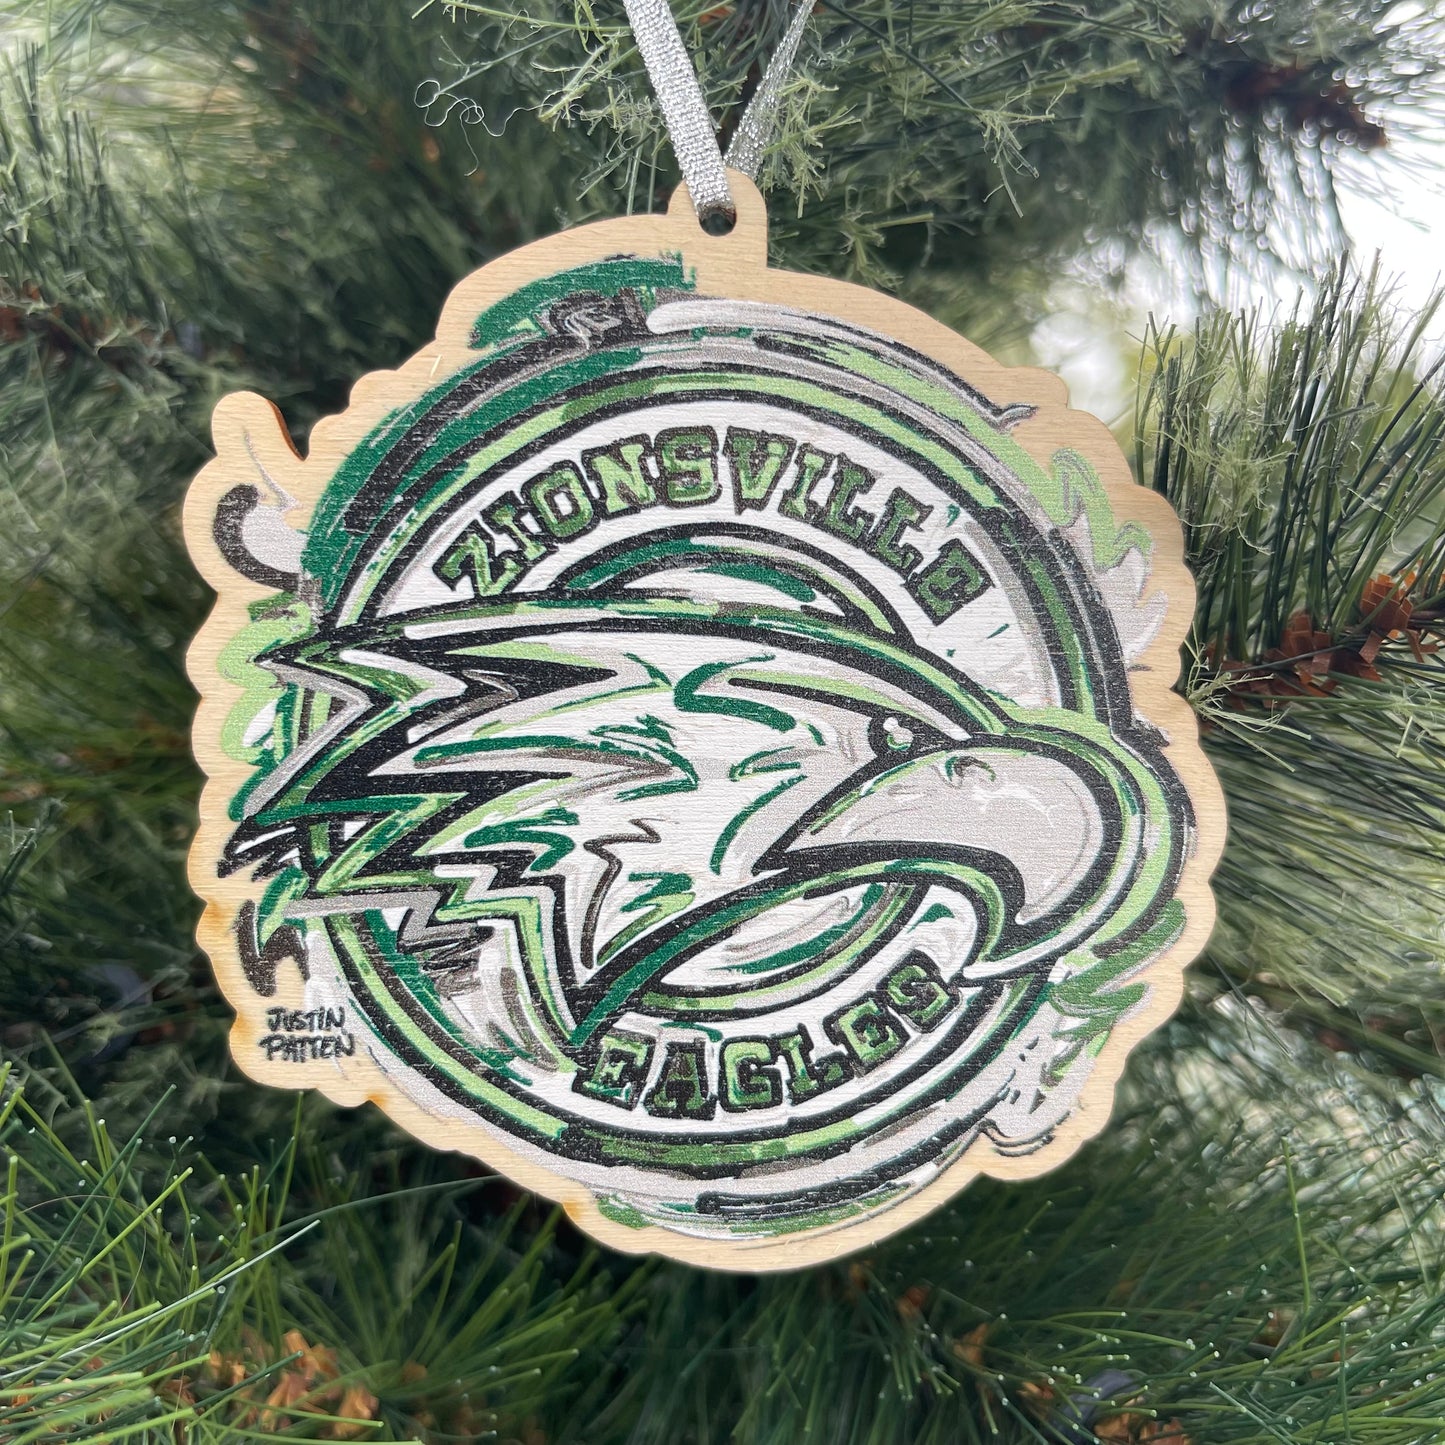 Zionsville Indiana Eagle Ornament by Justin Patten (3 Styles)